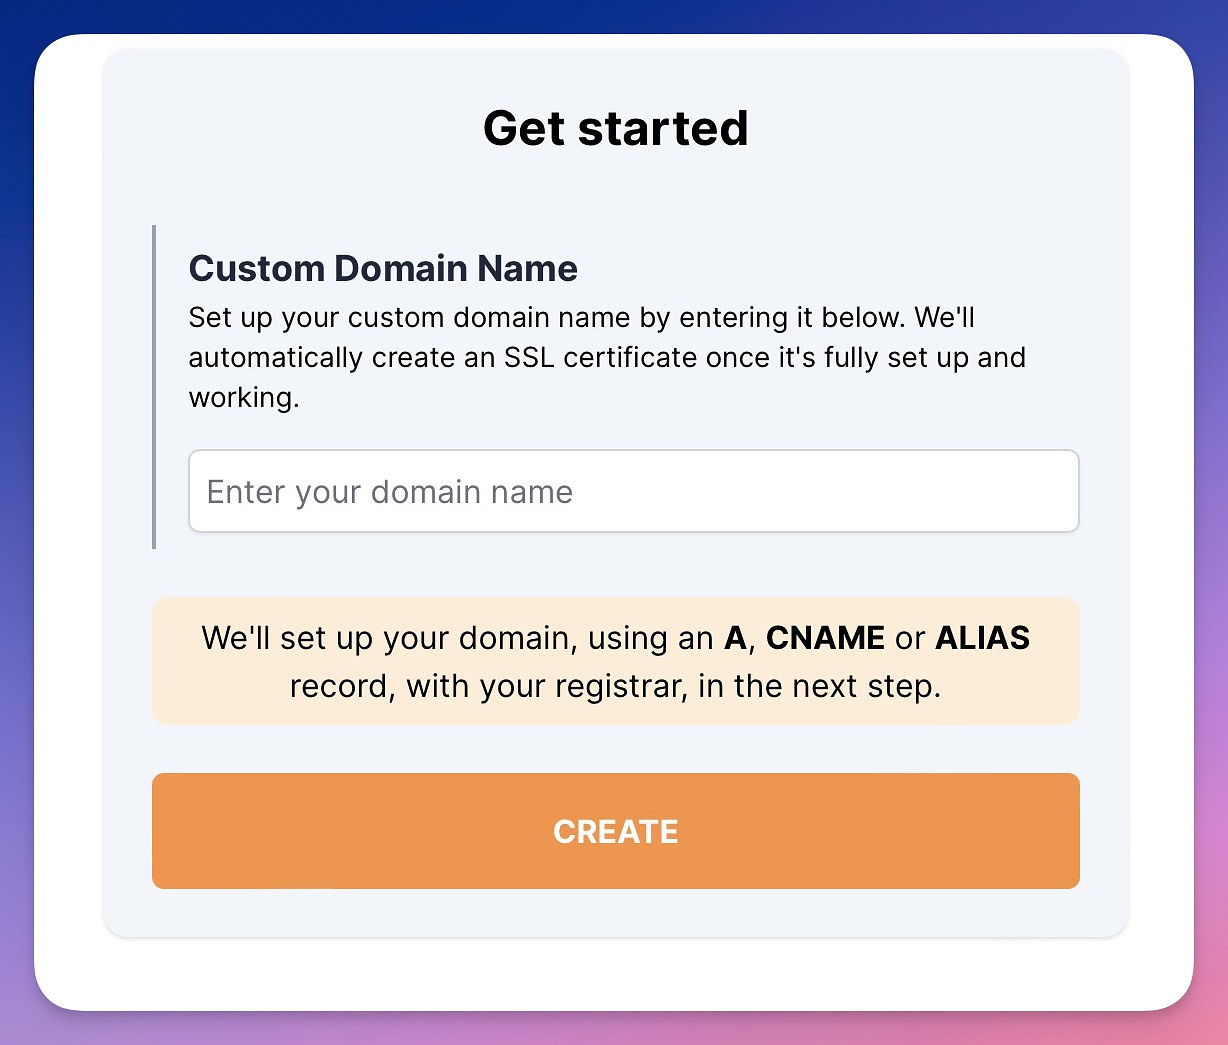 Get started by adding a domain name.